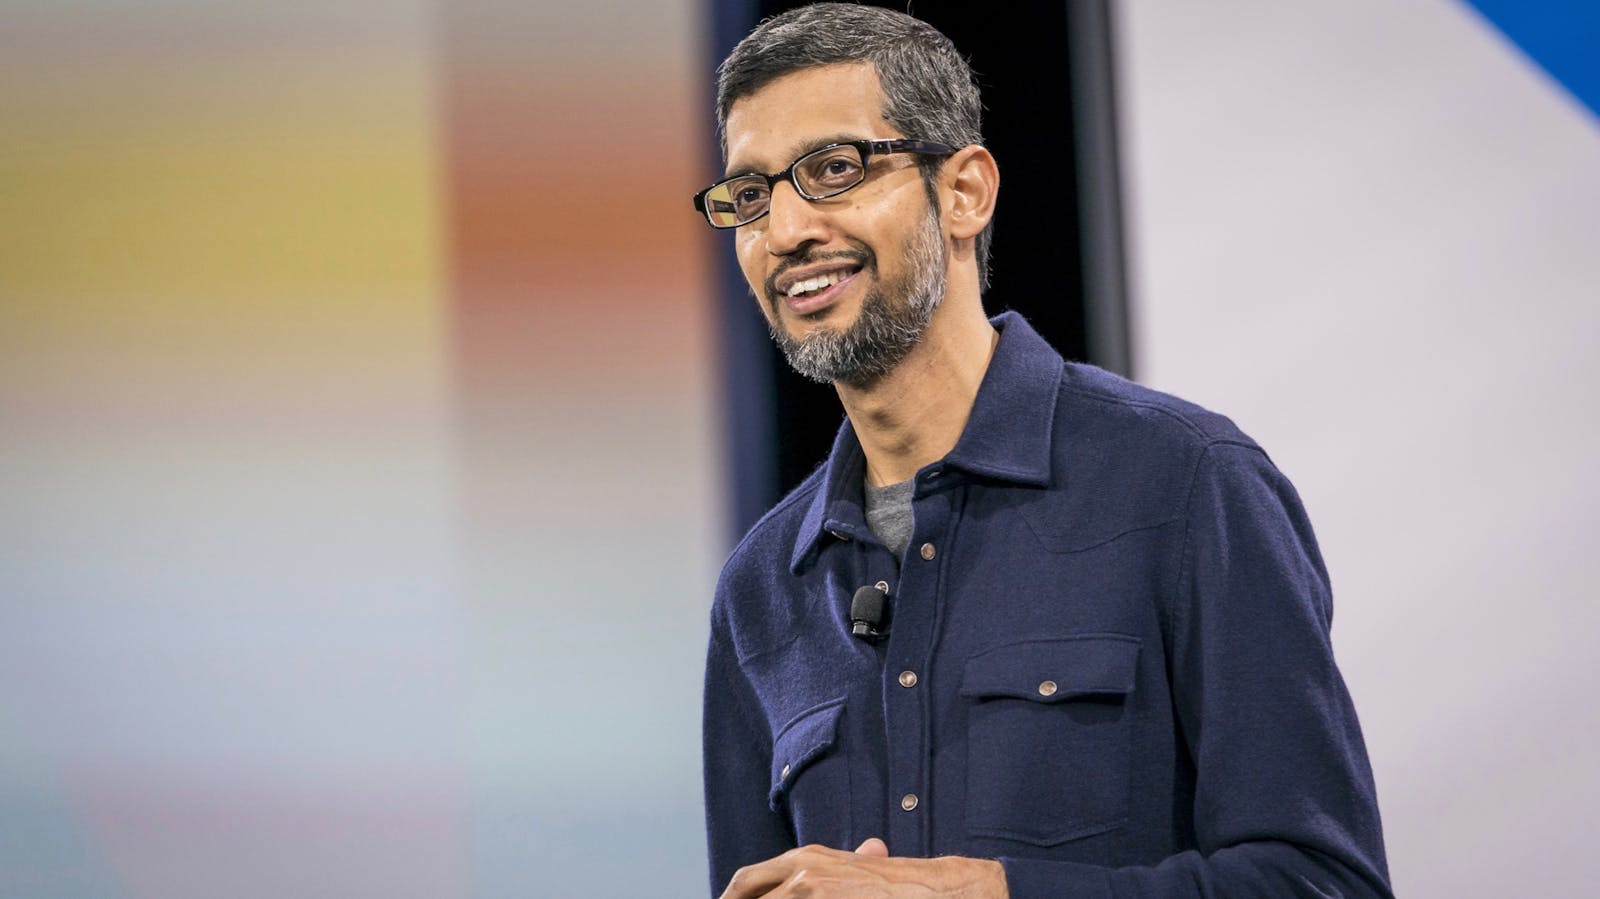 Google CEO Sundar Pichai at an event last month in San Francisco. Photo by Bloomberg 